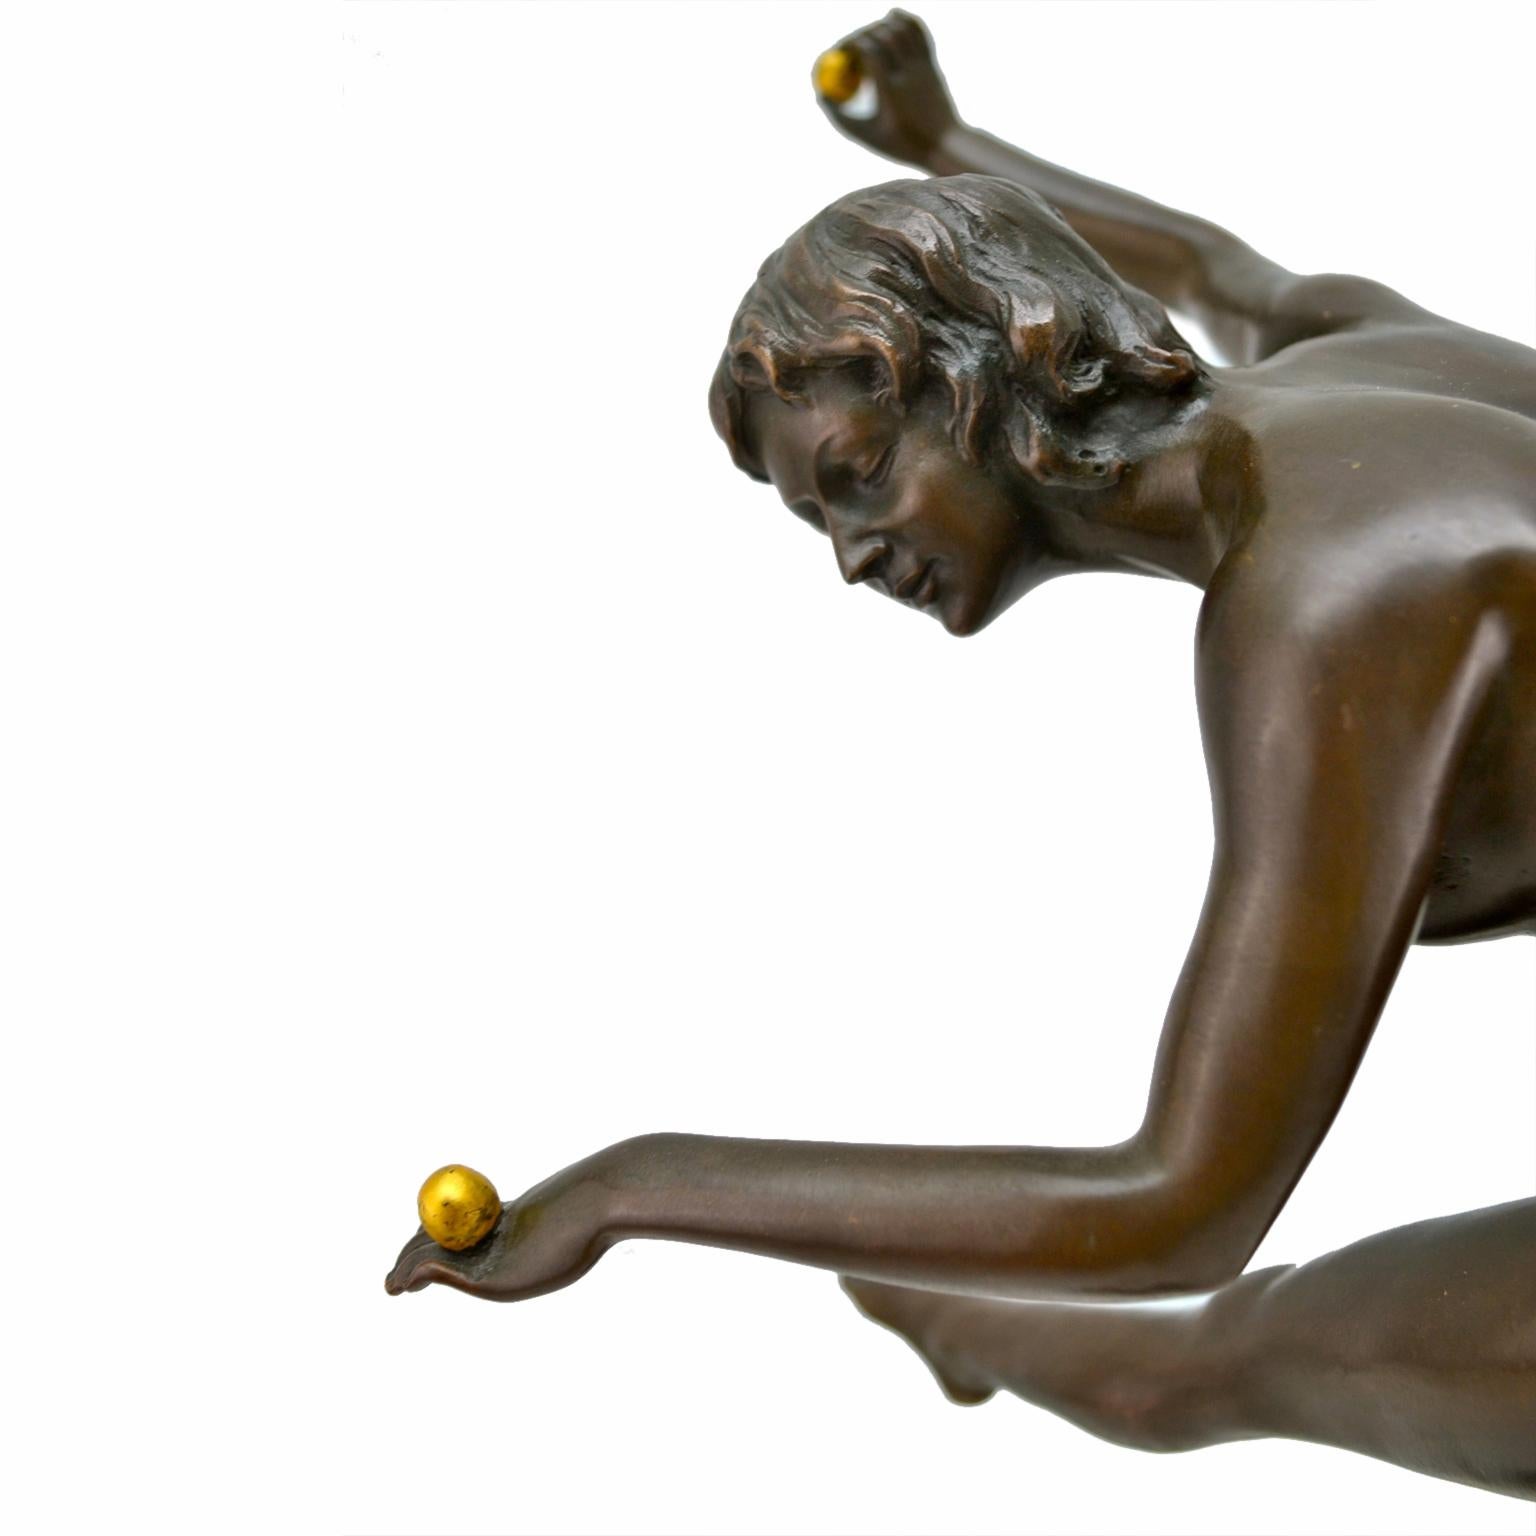 An Art Deco bronze figure with a dark brown patina after a model by Colinet. A young nude girl dances on top of a sphere her outstretched left leg and right arm balancing a gold ball. Signed Colinet but there are no foundry marks.